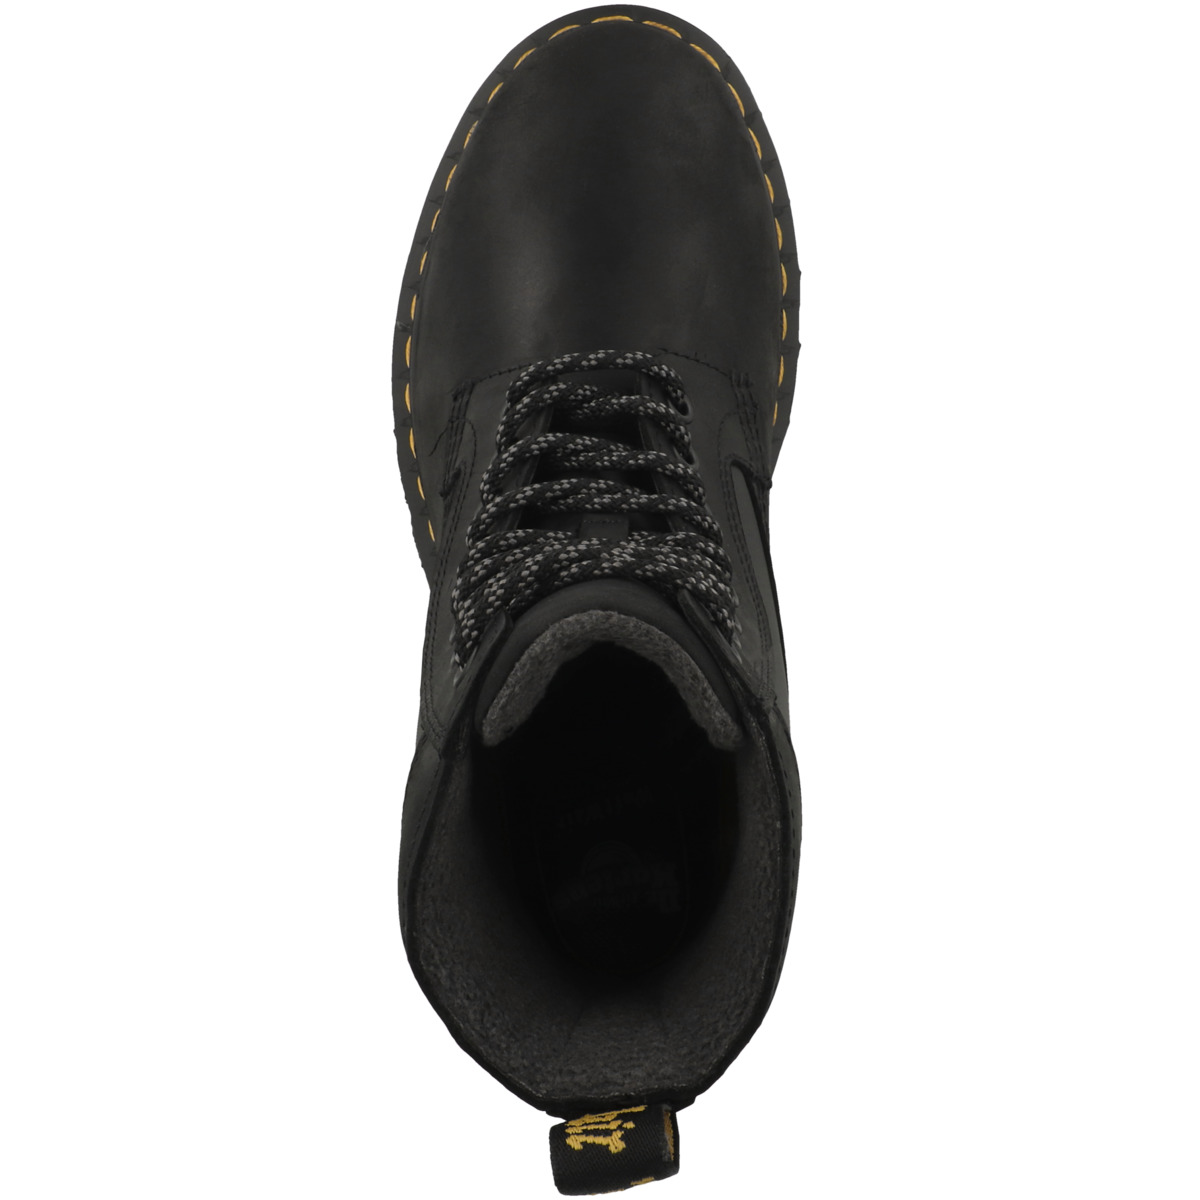 Dr. Martens 1460 Trinity Boots